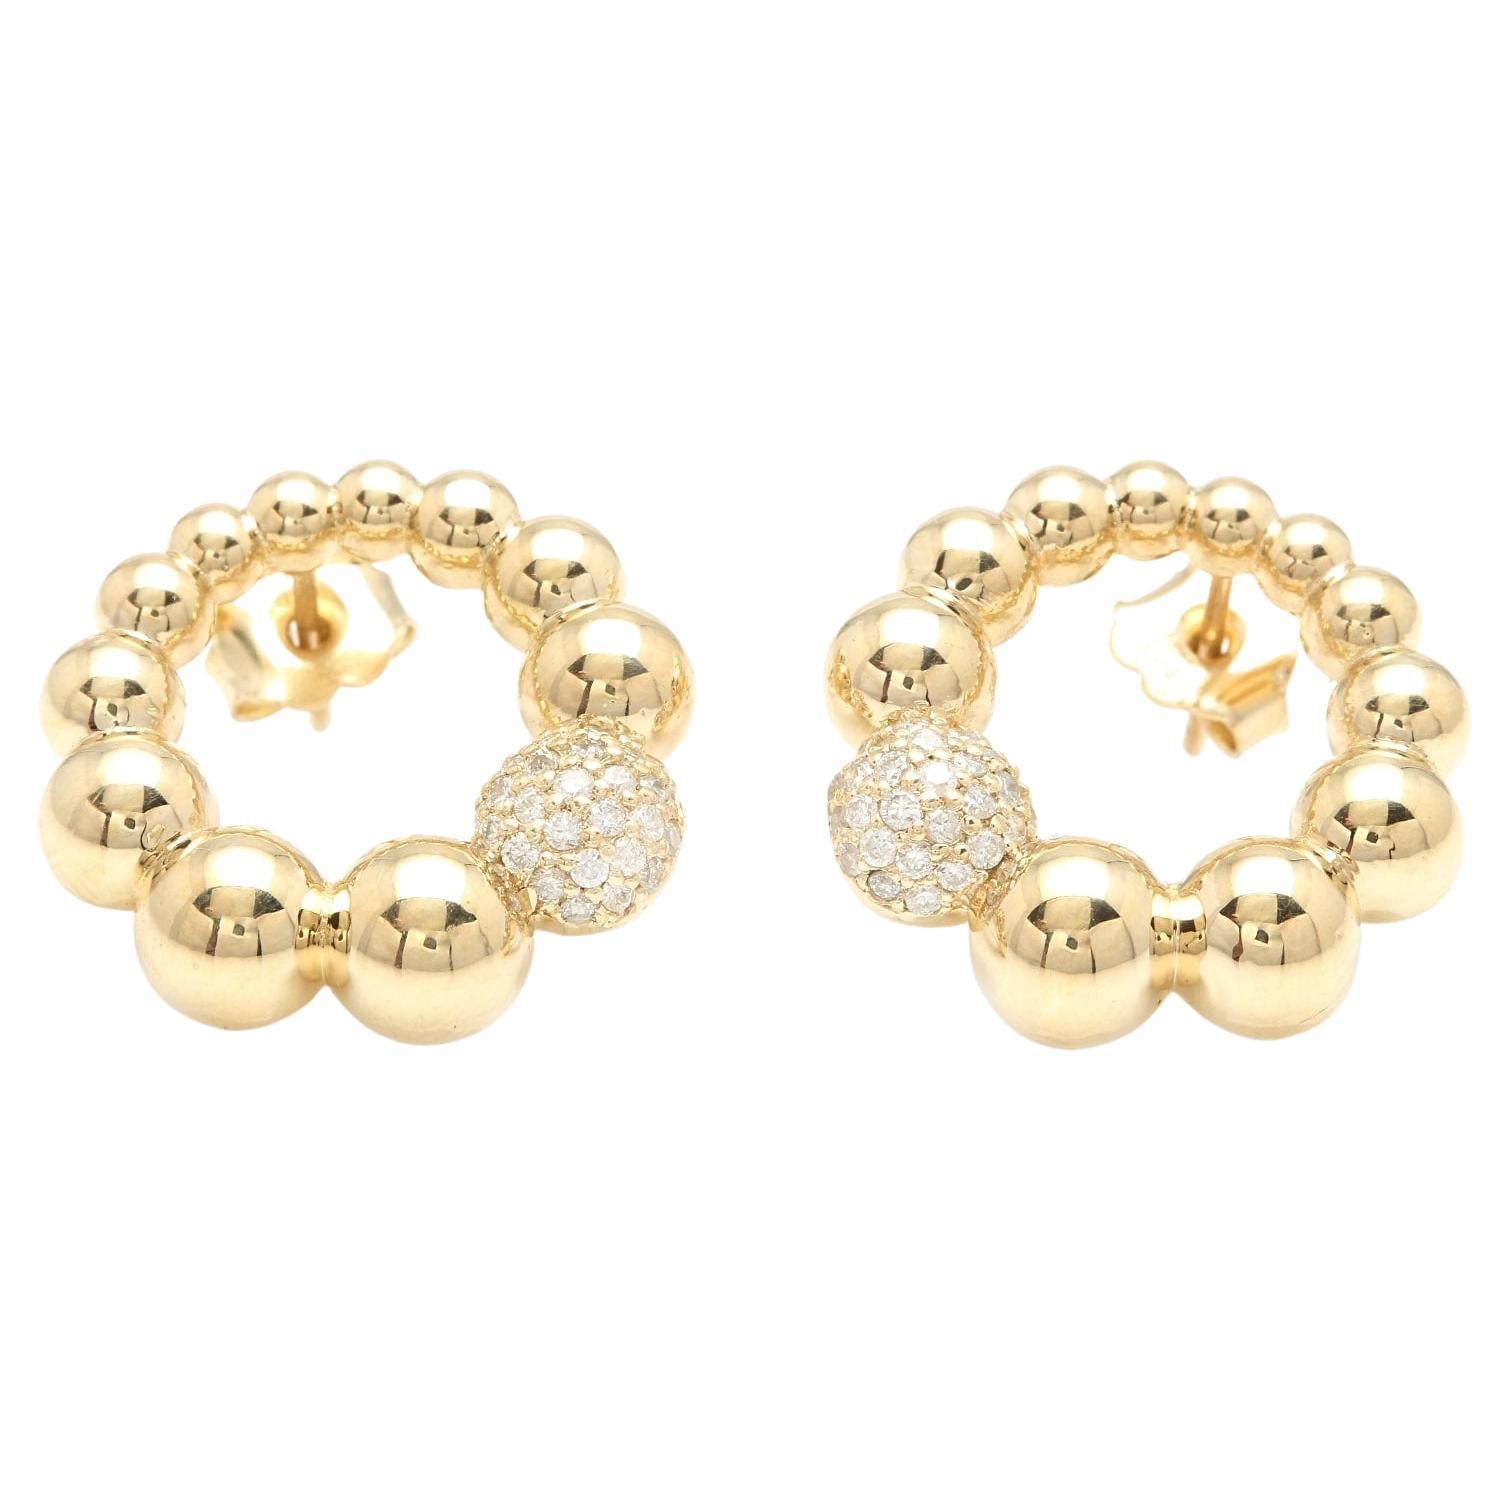 Exquisite 0.50 Carats Natural Diamond 14K Solid Yellow Gold Stud Earrings For Sale